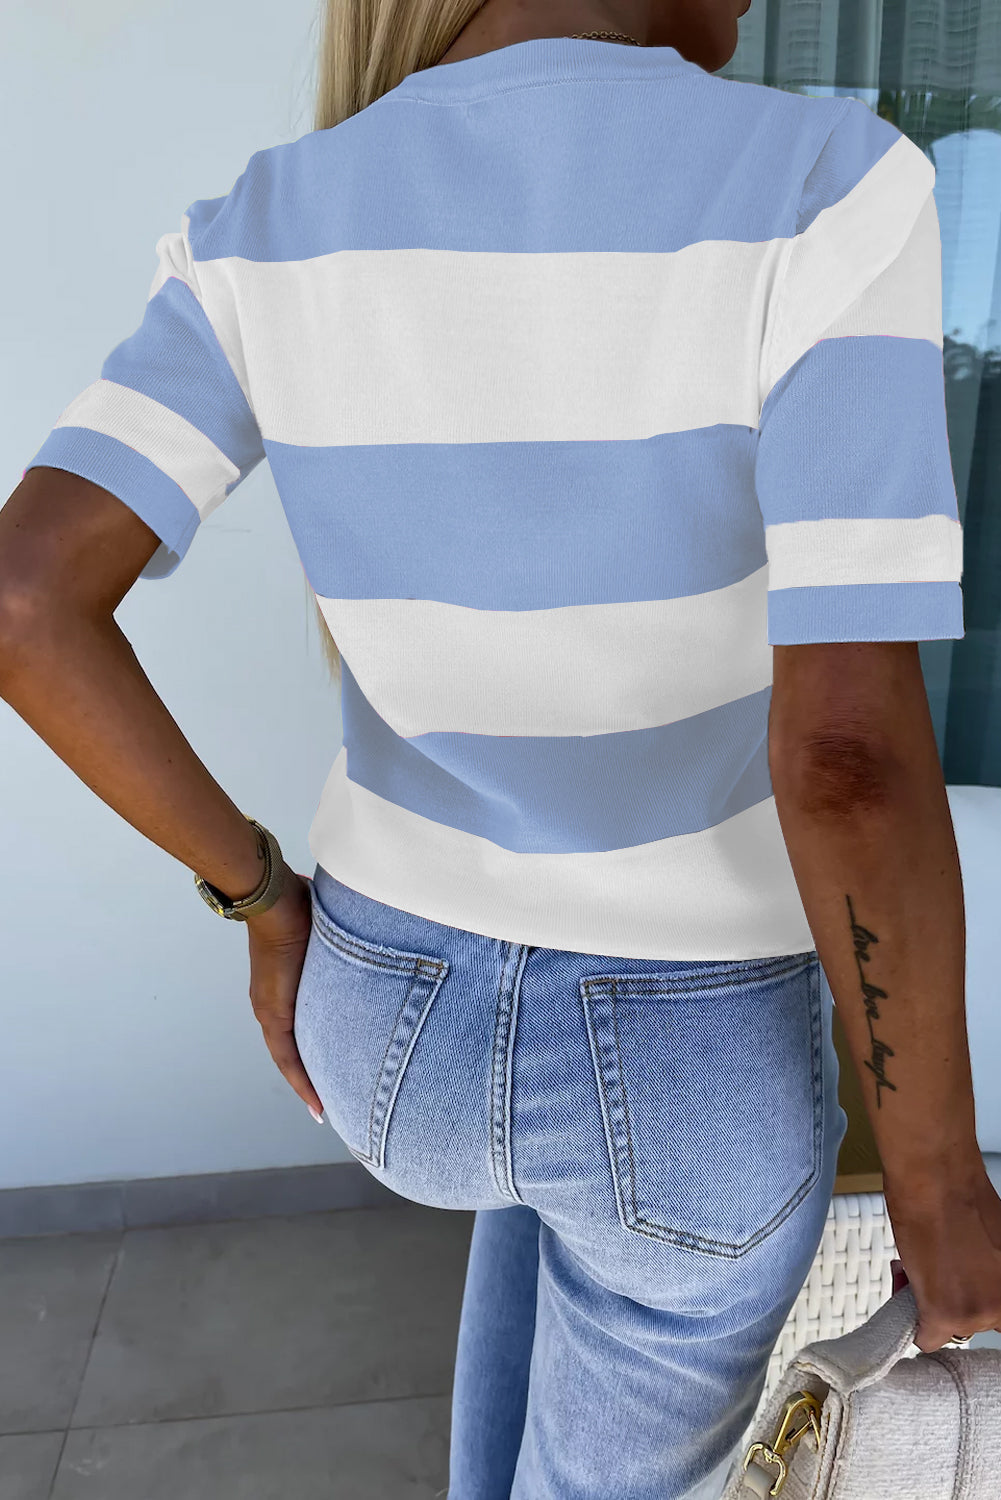 Sky Blue Stripe Colorblock Striped Knitted T shirt Pre Order Sweaters & Cardigans JT's Designer Fashion